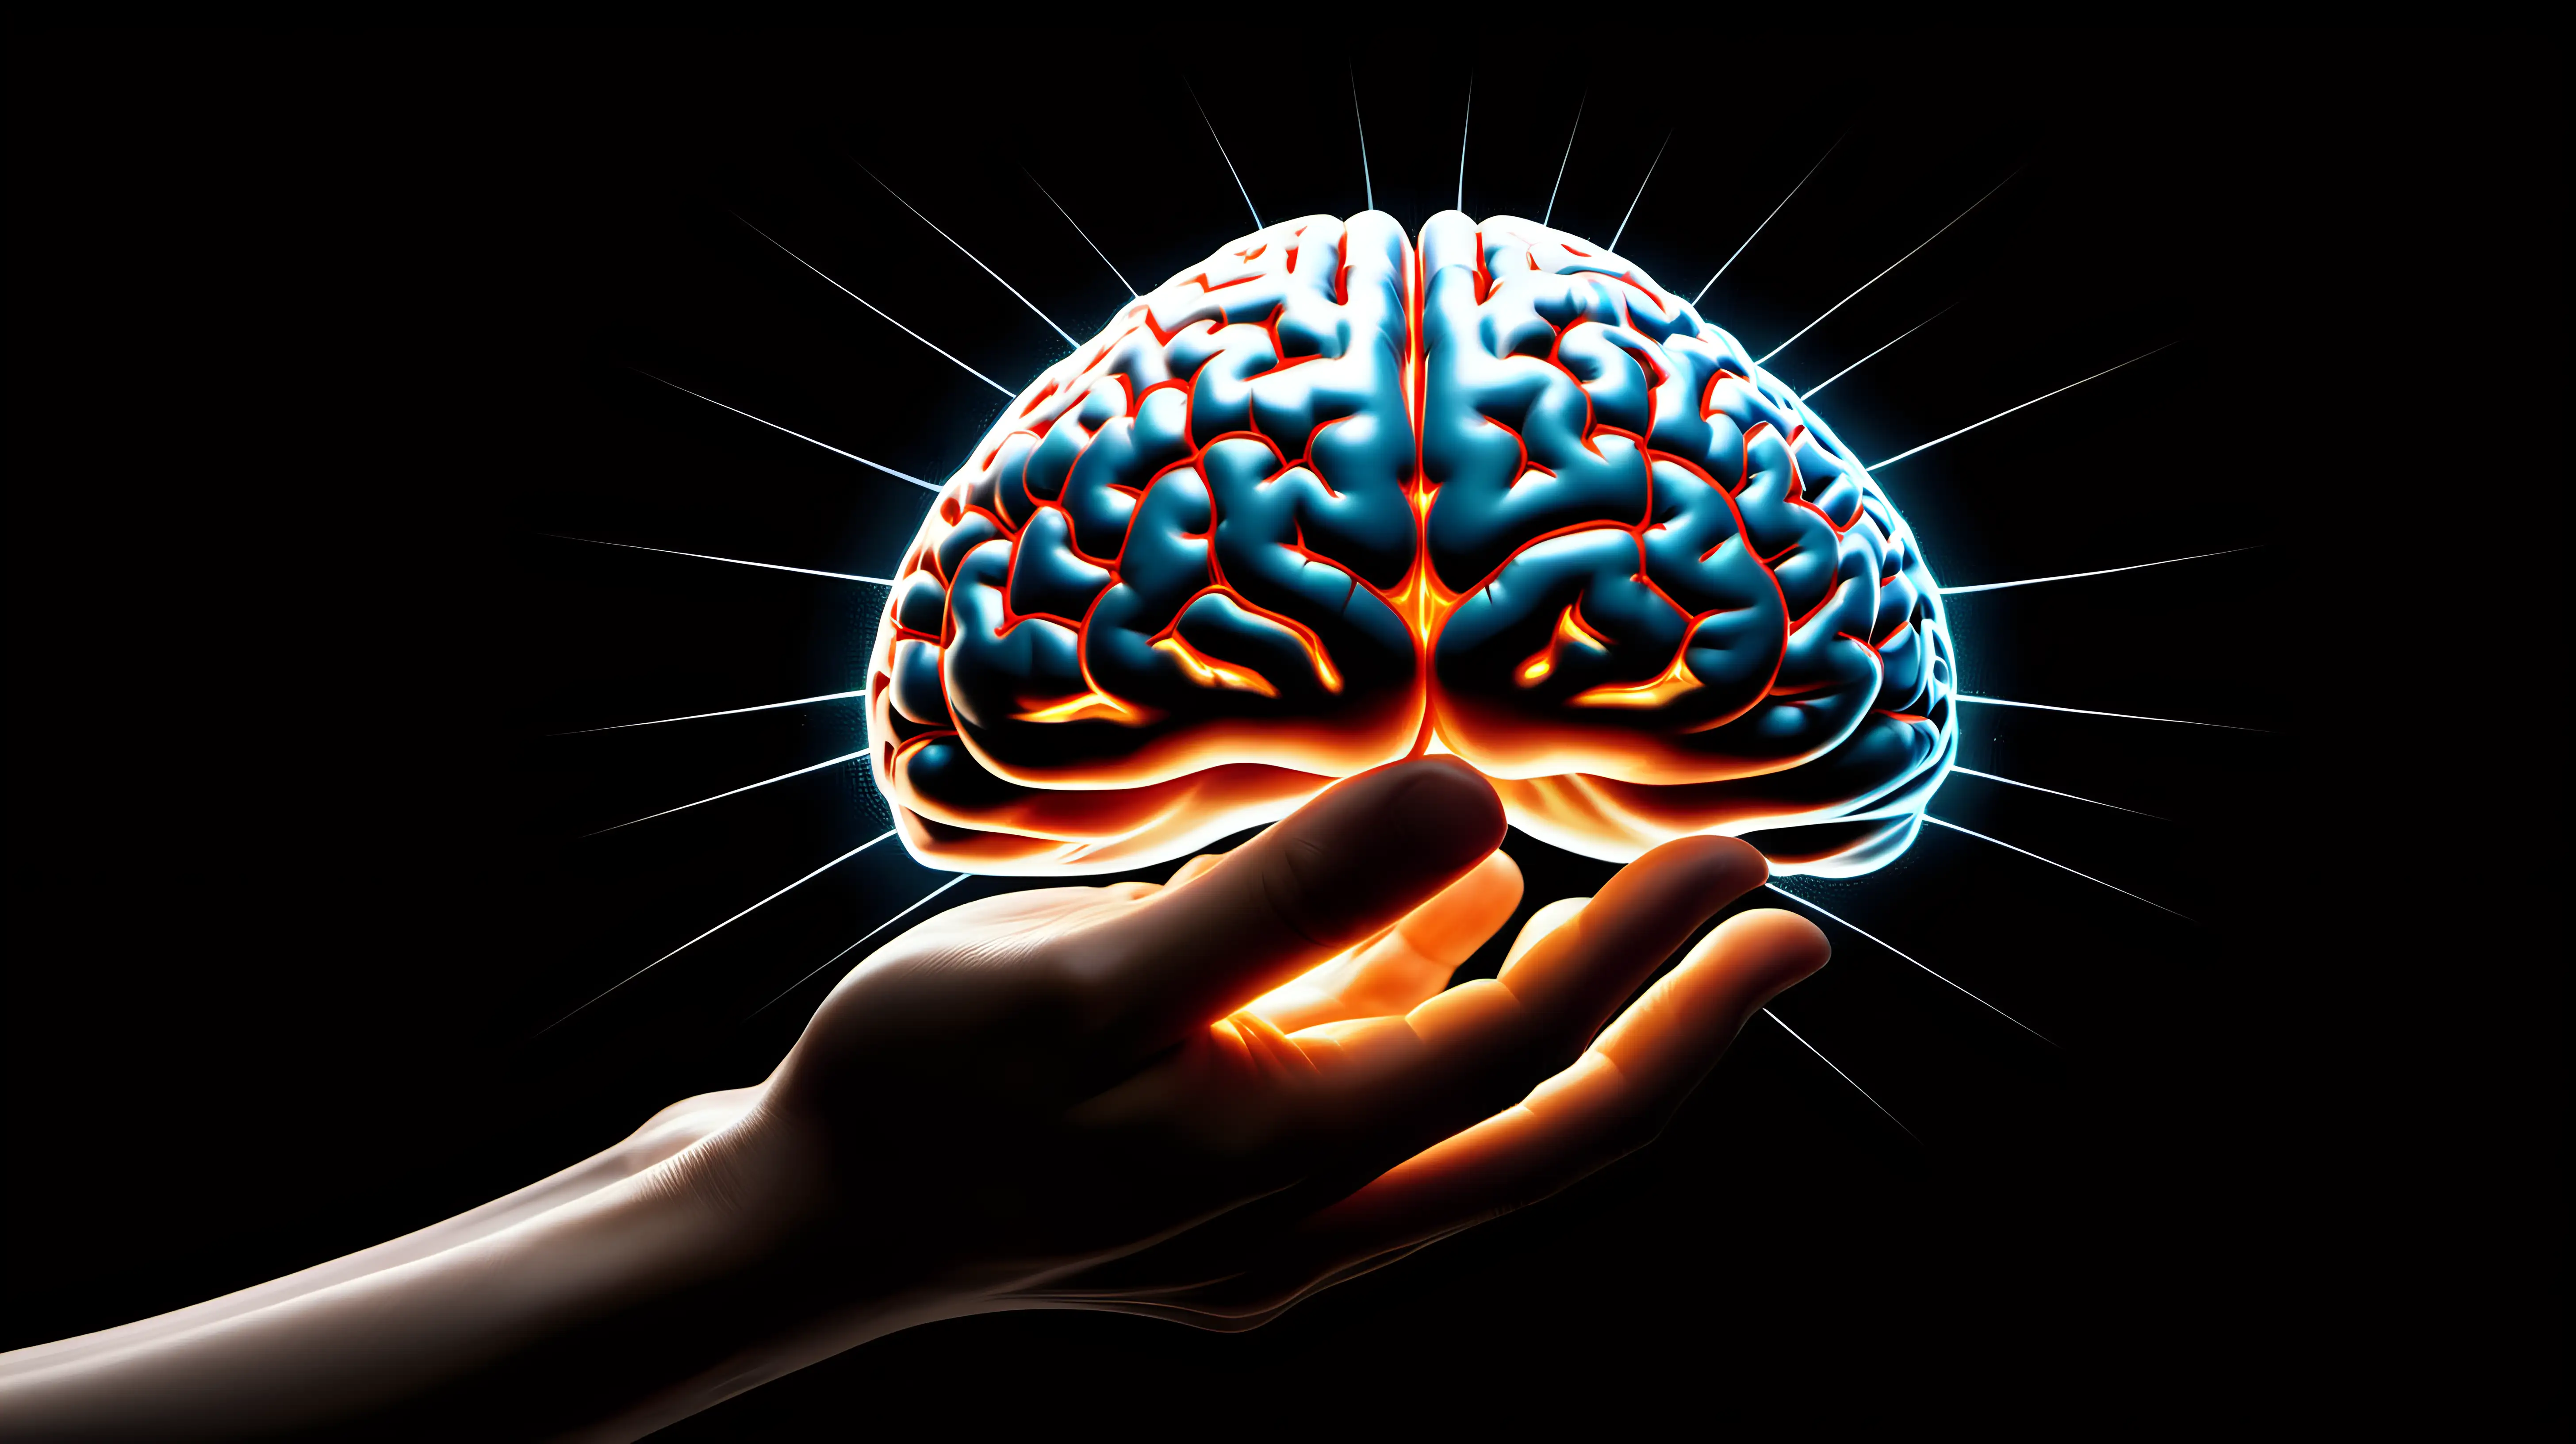 Emphasize the connection between a person and the pulsating, radiant brain they hold in their hands, set against a black background to intensify the focus on brain health and care.